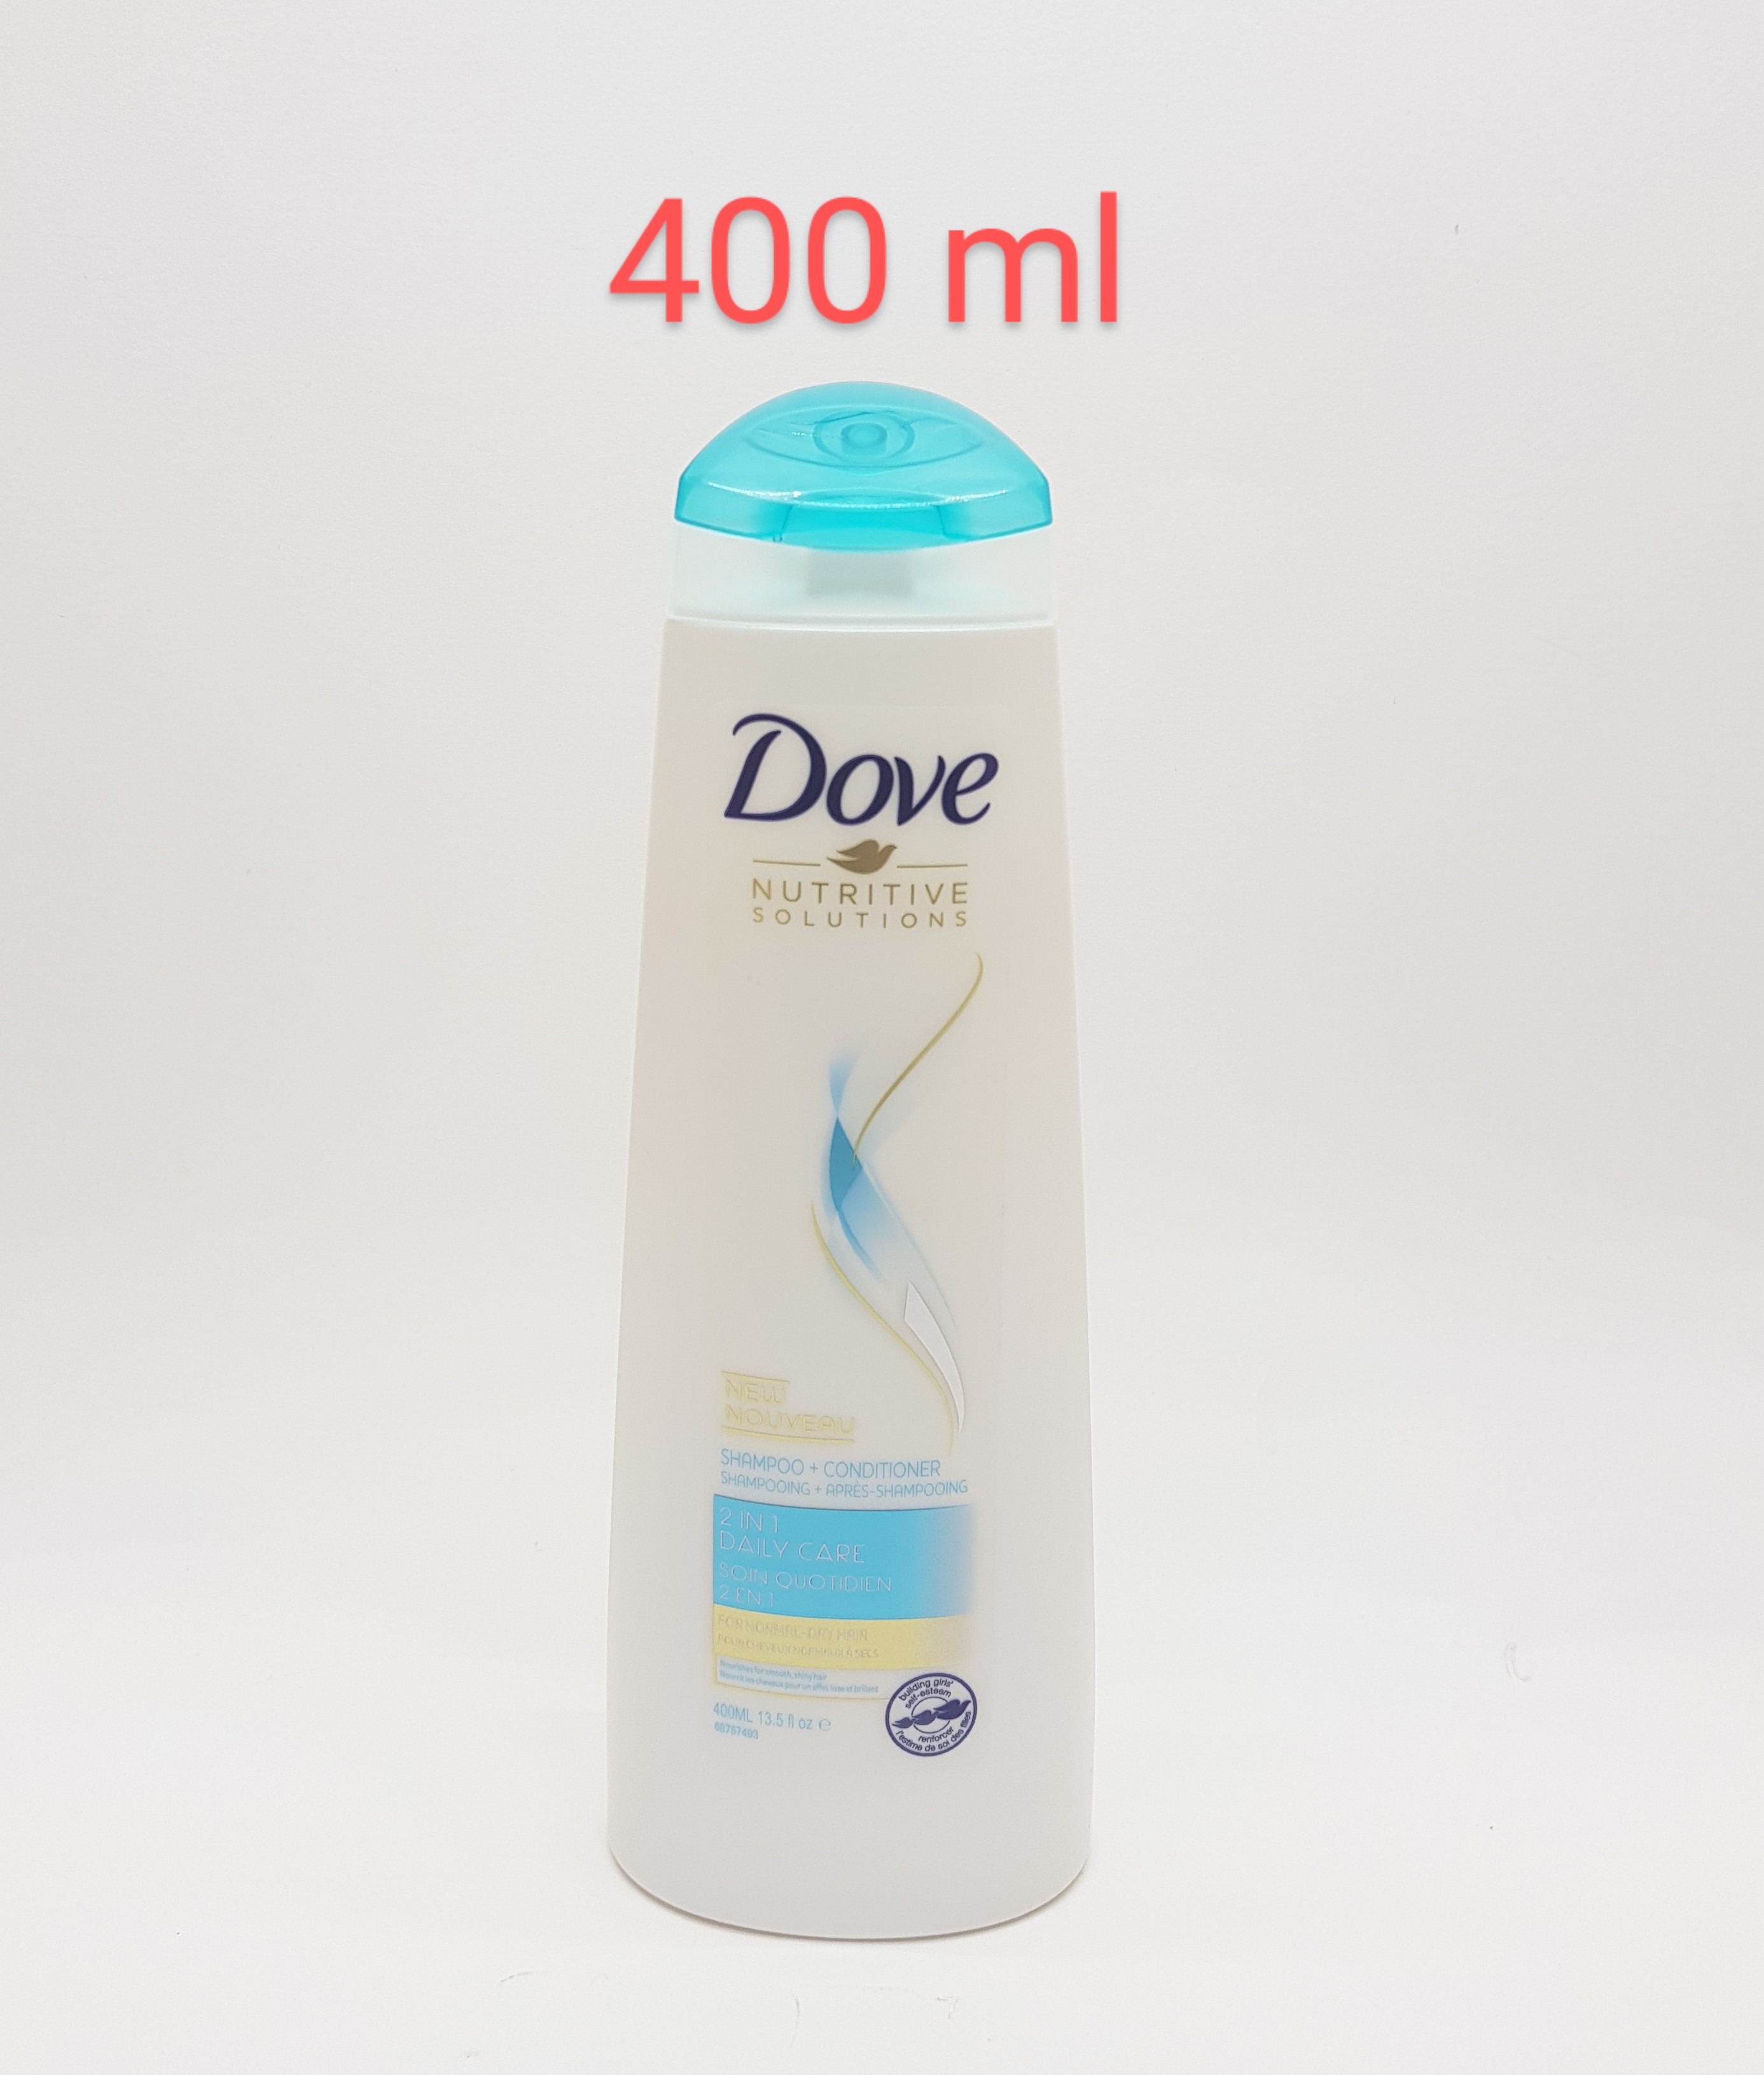 Dove Nutritive SolutIion Shampoo + Conditioner 2 In 1 Daily Care For Normal / Dry Hair 13.5 fl. oz. / 400 ml (Cargo)